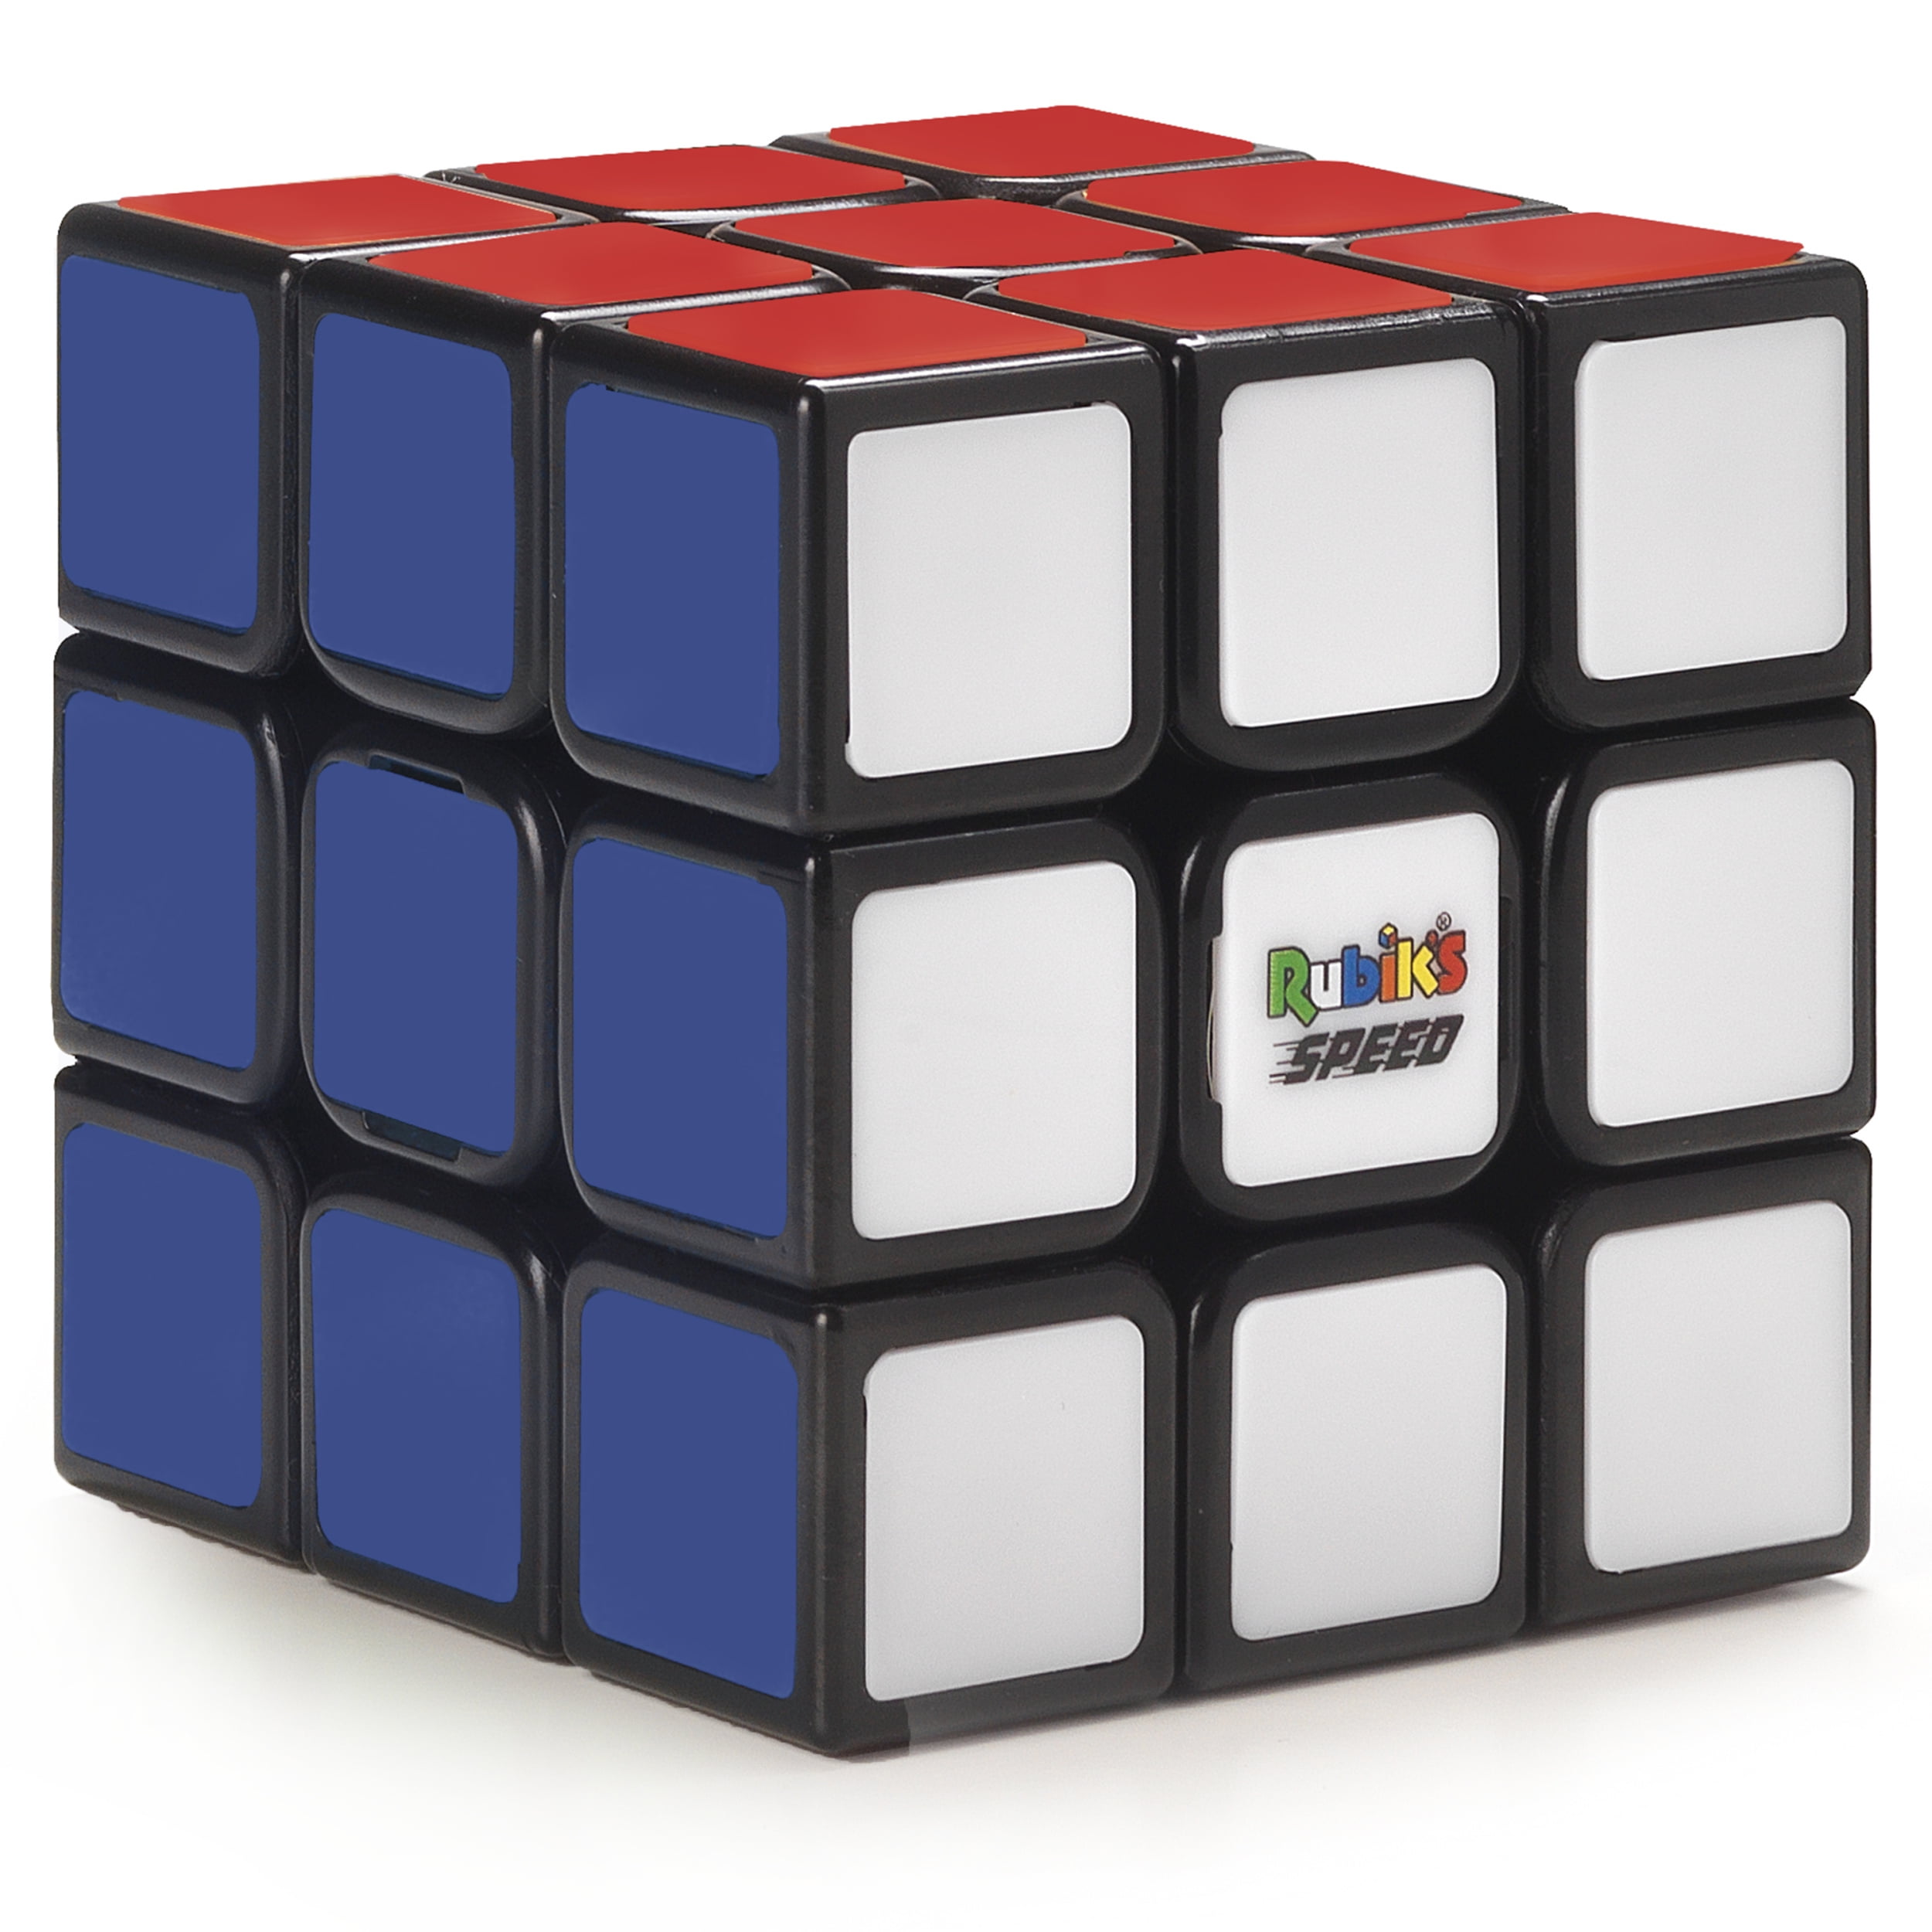 Value Pack Forever Color 2x2x2 3x3x3 Magic Cube 2x Magic Cube Stands & Pouches 